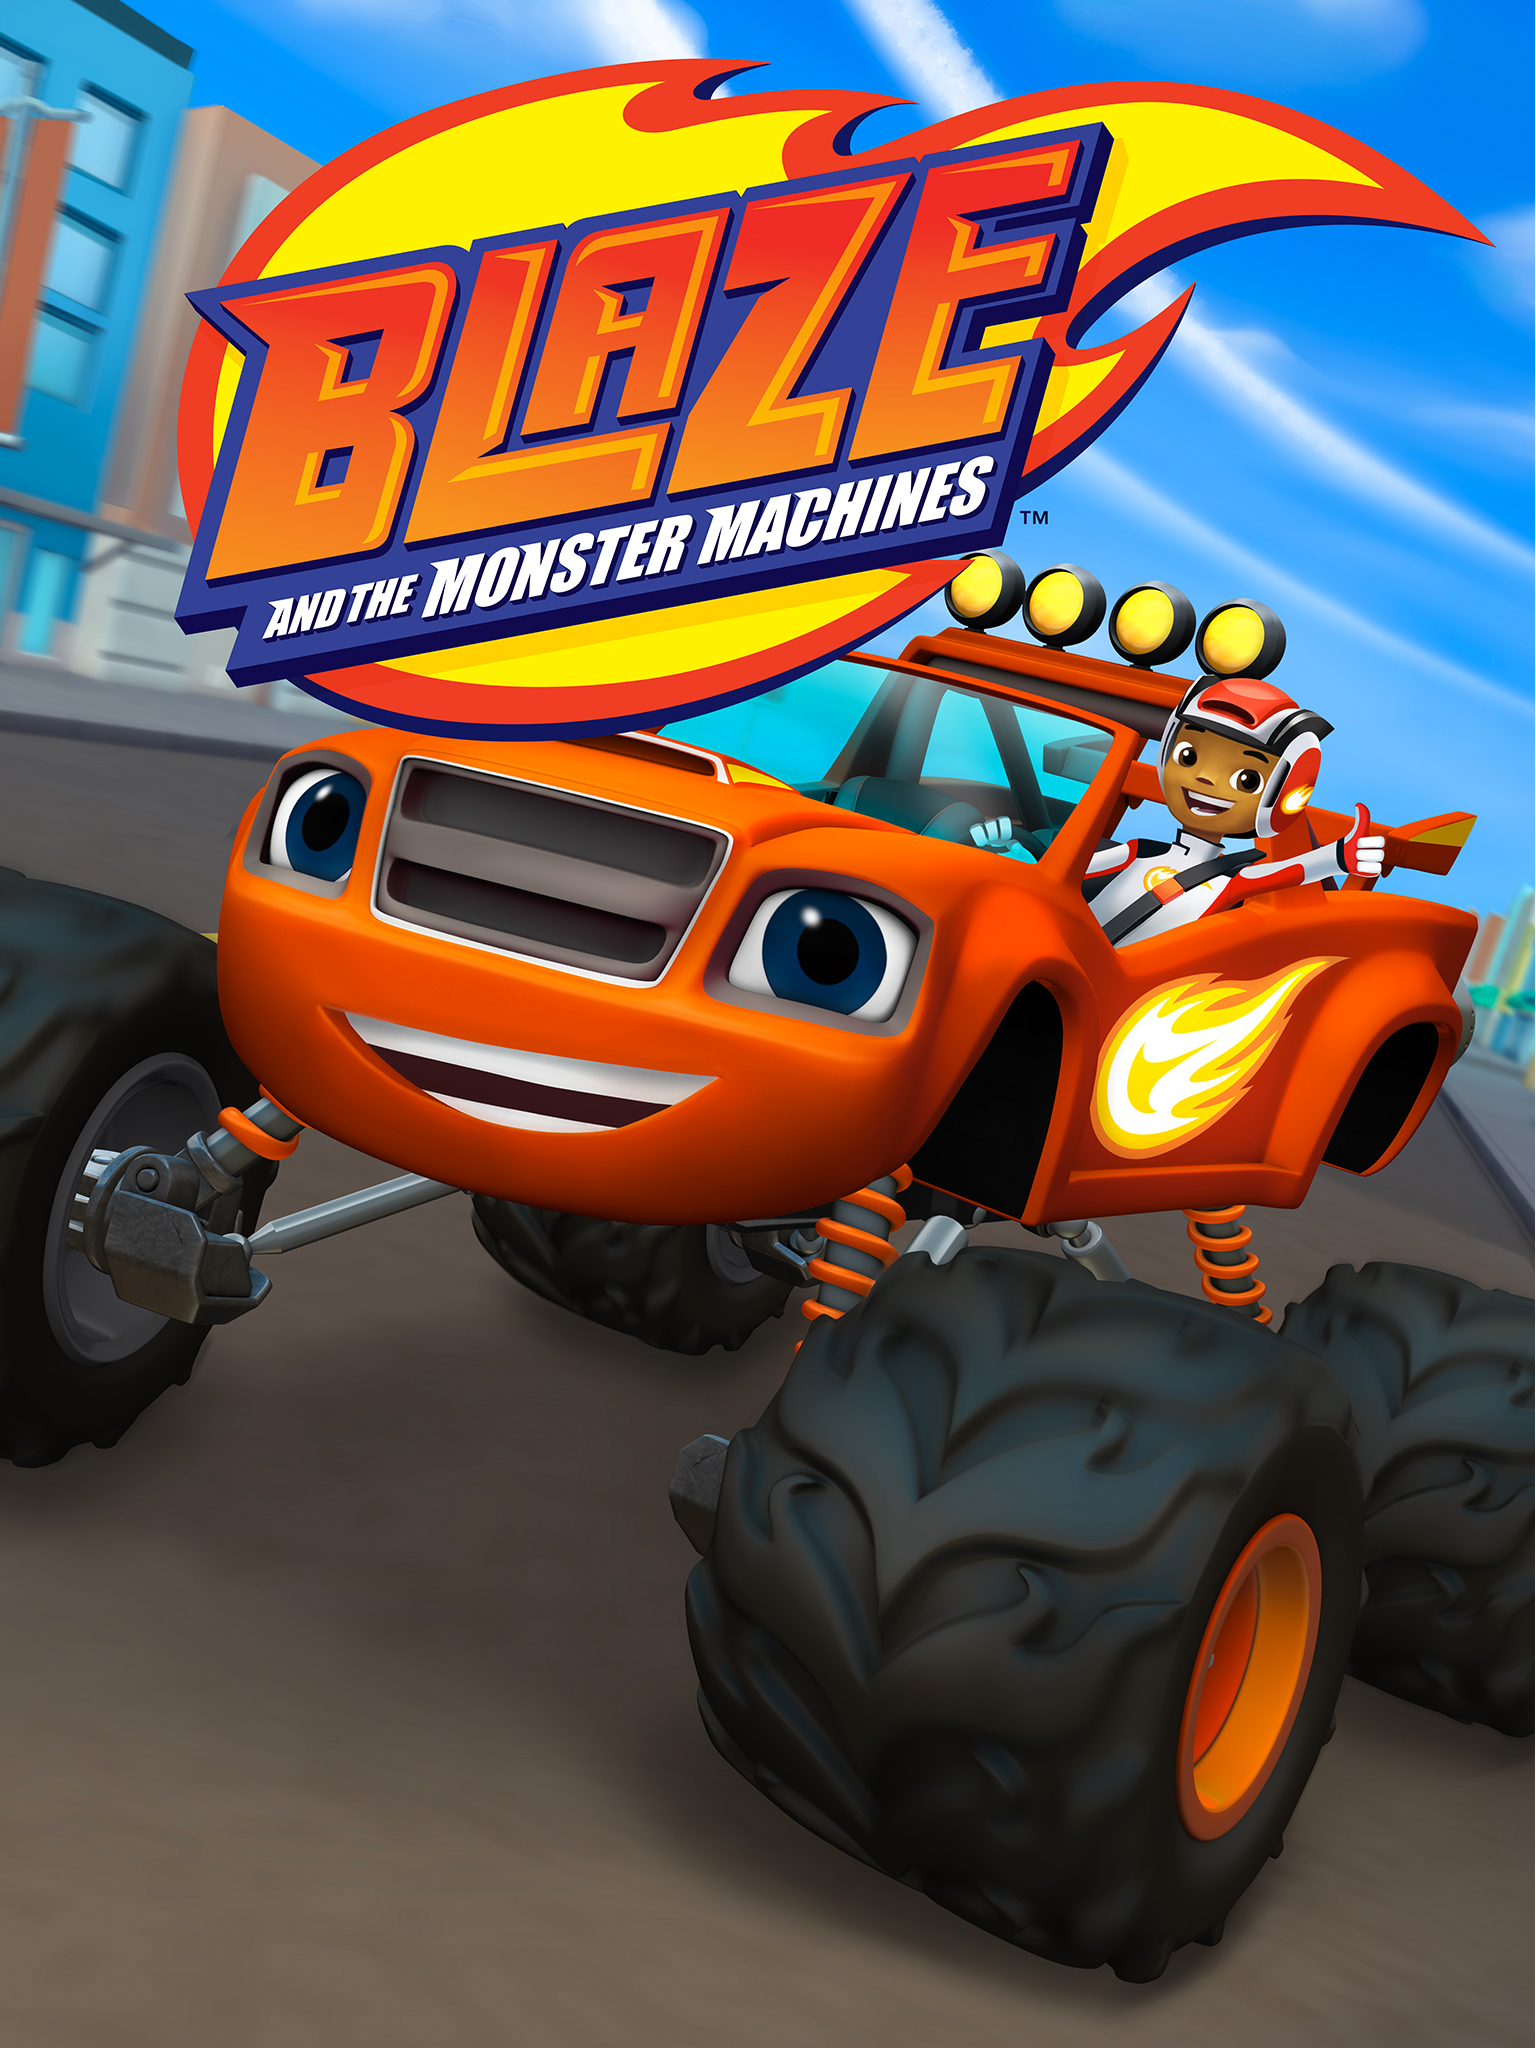 Blaze and the Monster Machines.